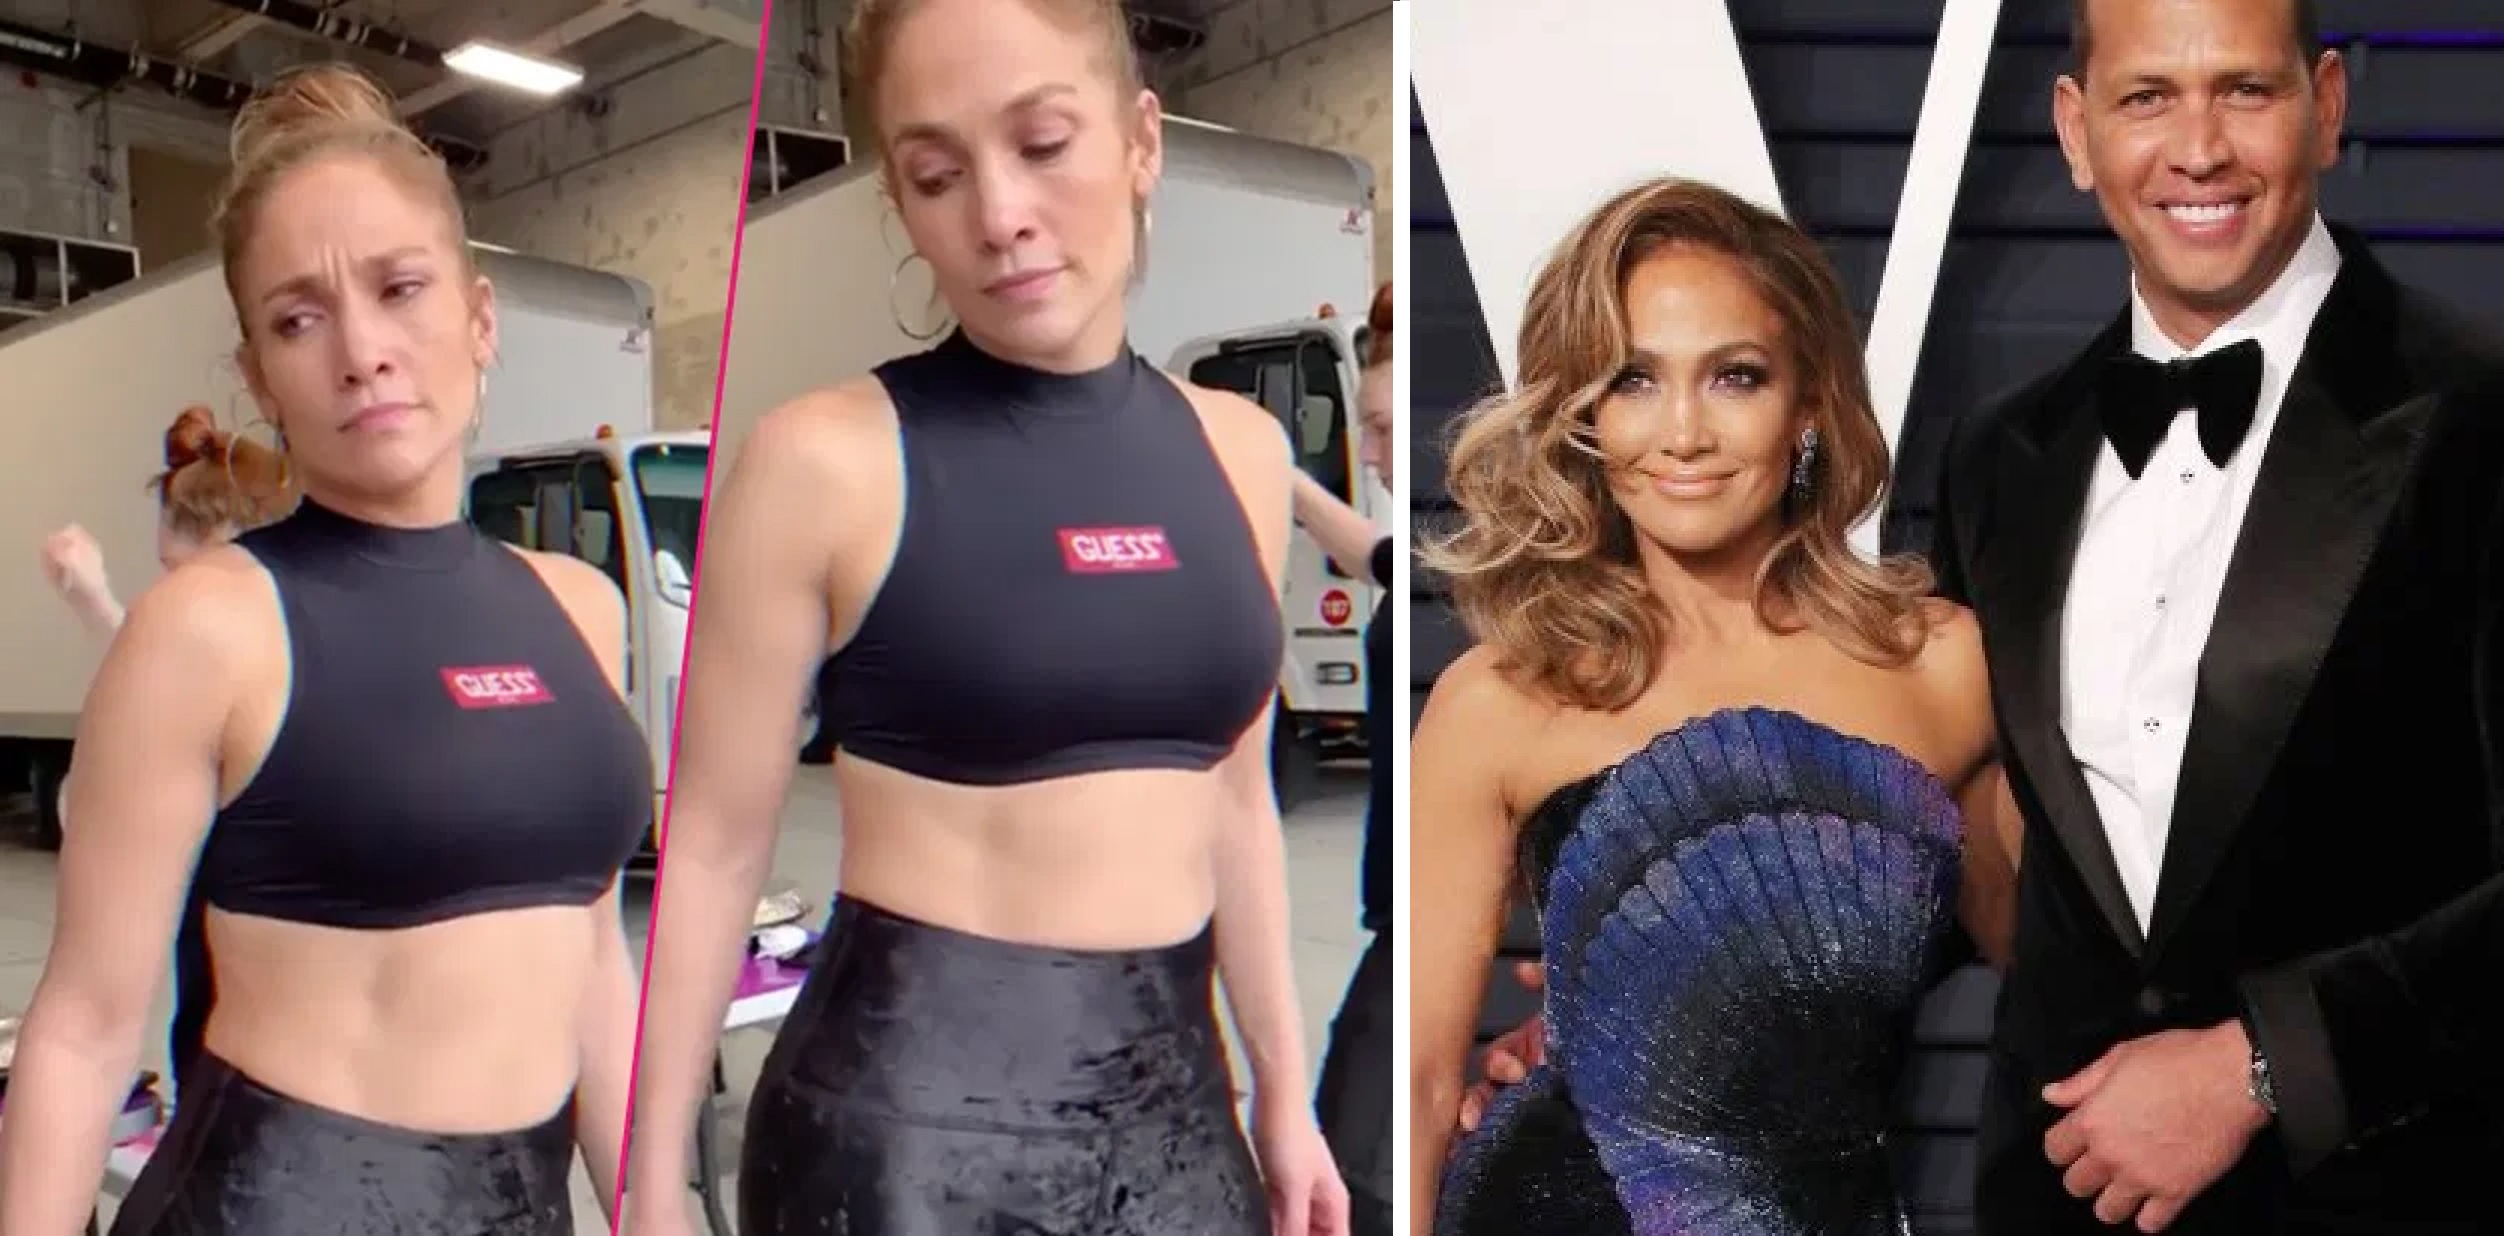 Watch: Sneak Peak of JLo’s Super Bowl Rehearsal Shared by Alex Rodriguez